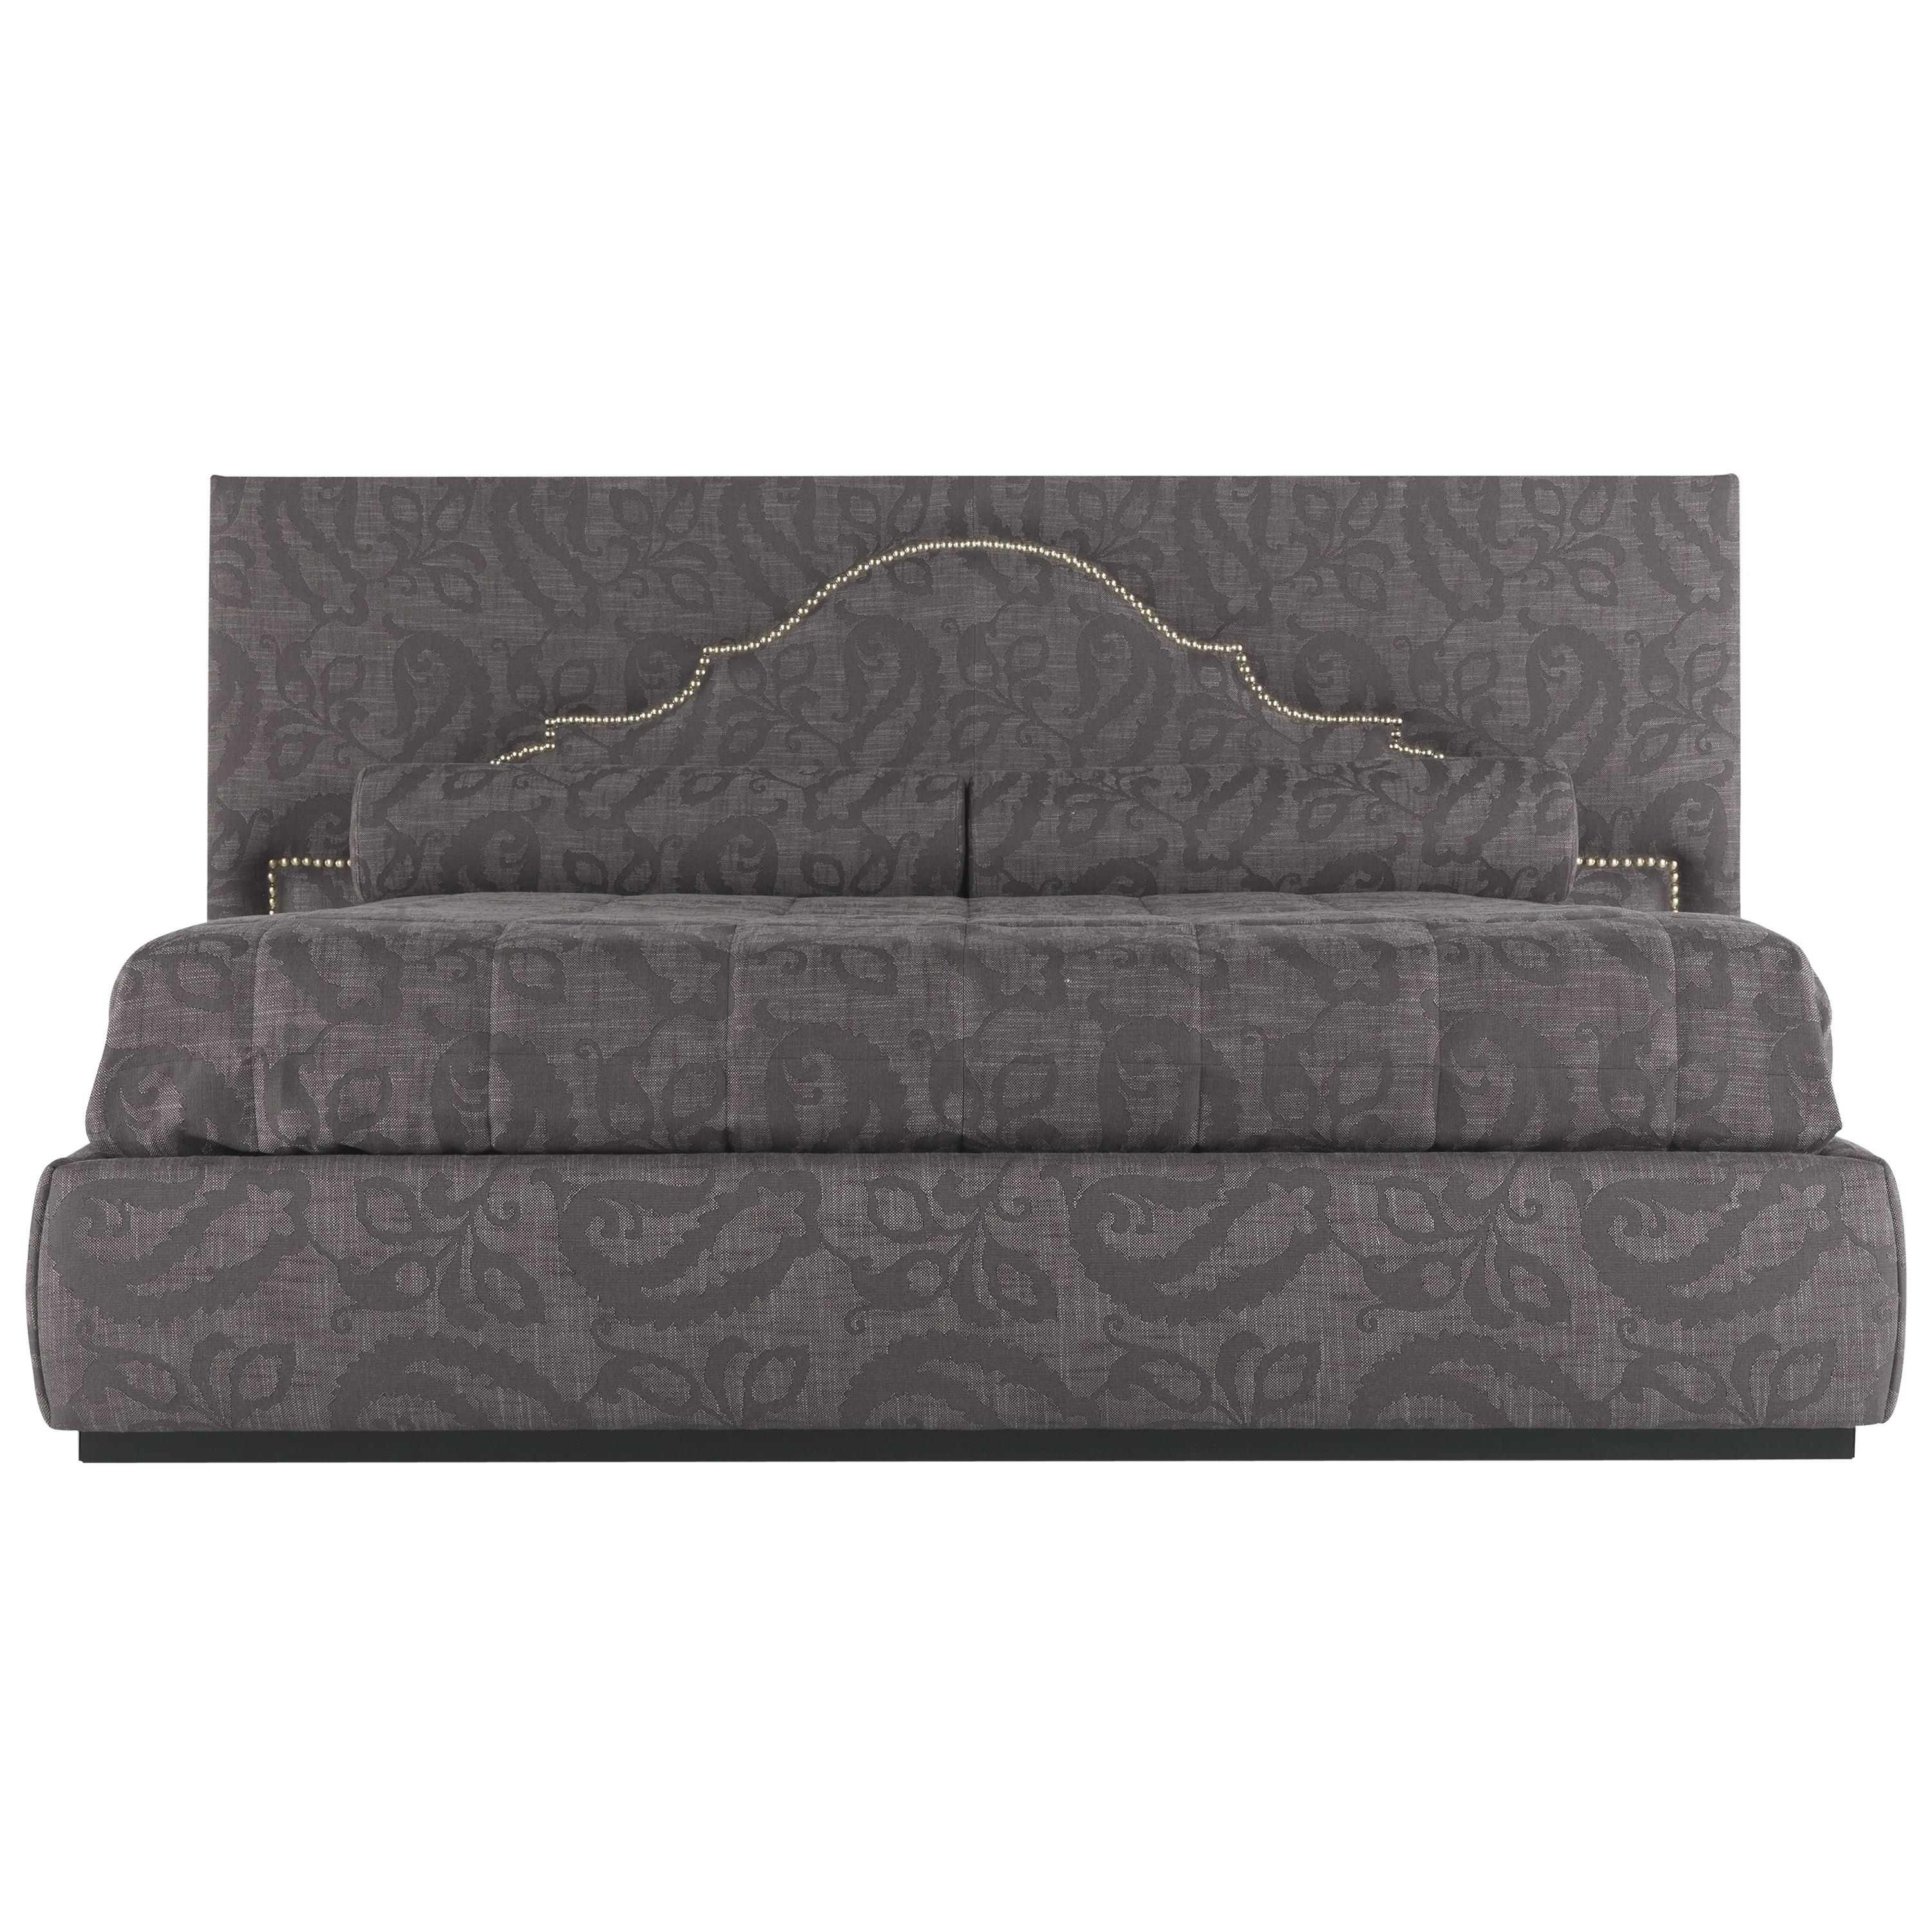 Etro Home Interiors Bombay Bed in Fabric